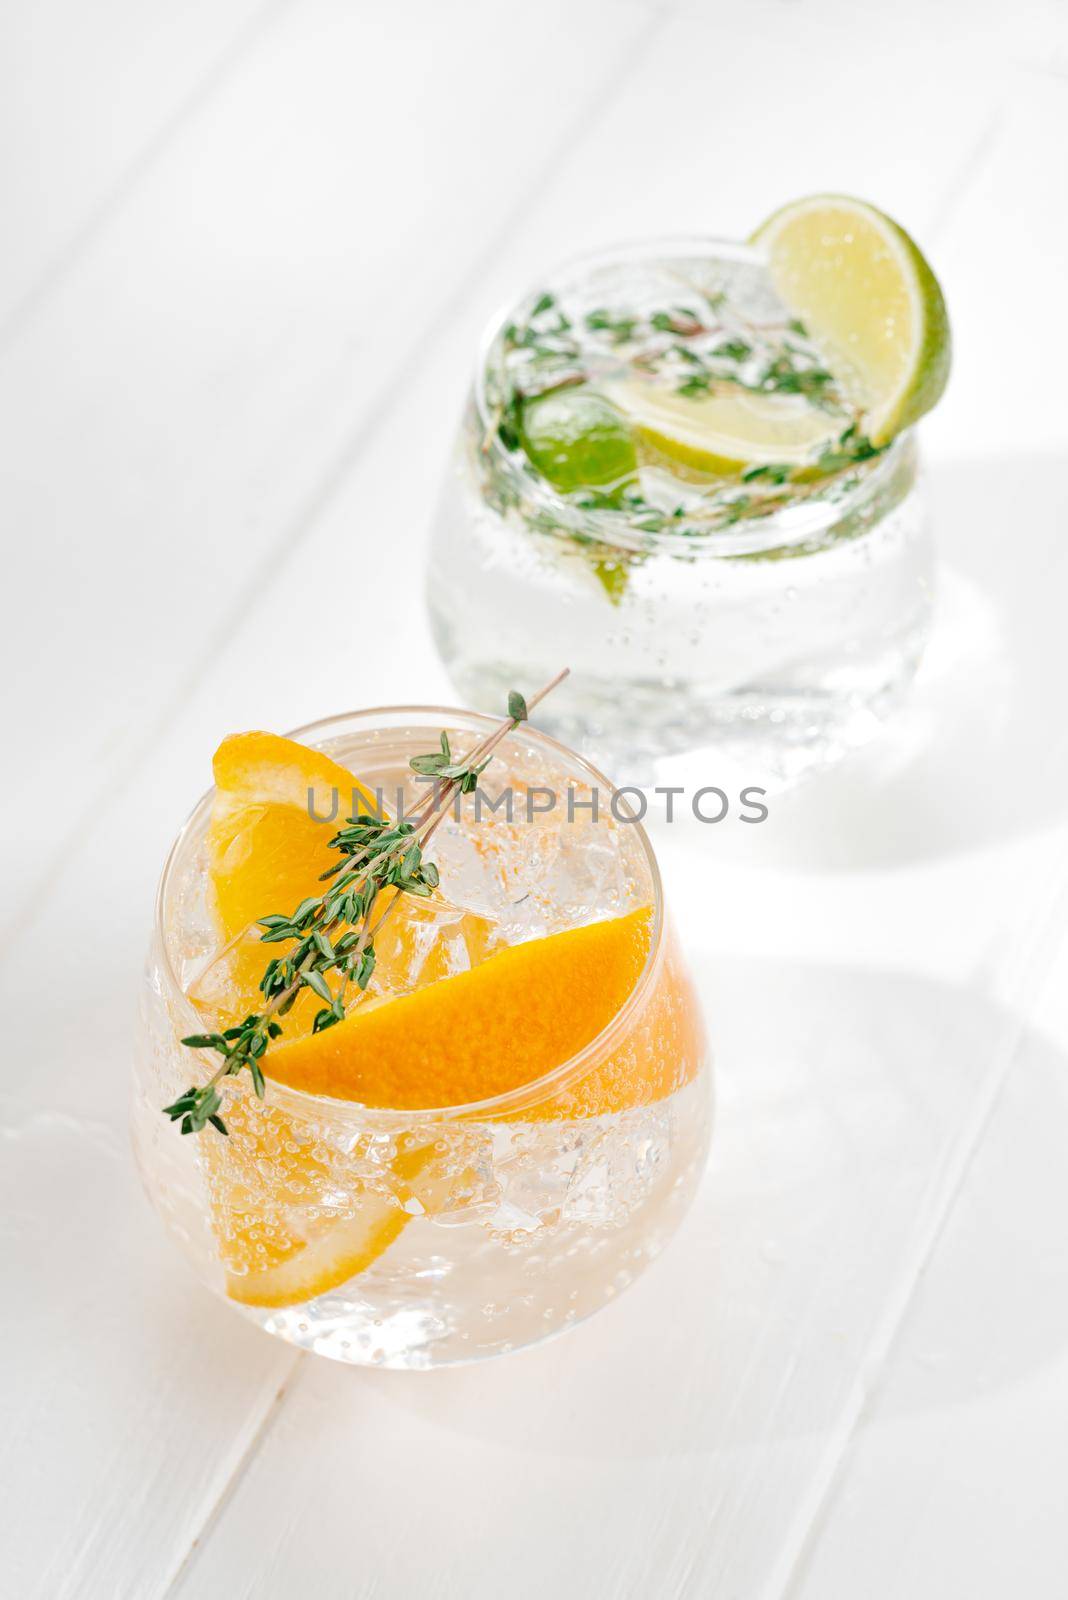 two glasses with an alcoholic cocktail on a light background. hard seltzer is a low-alcoholic drink by gulyaevstudio